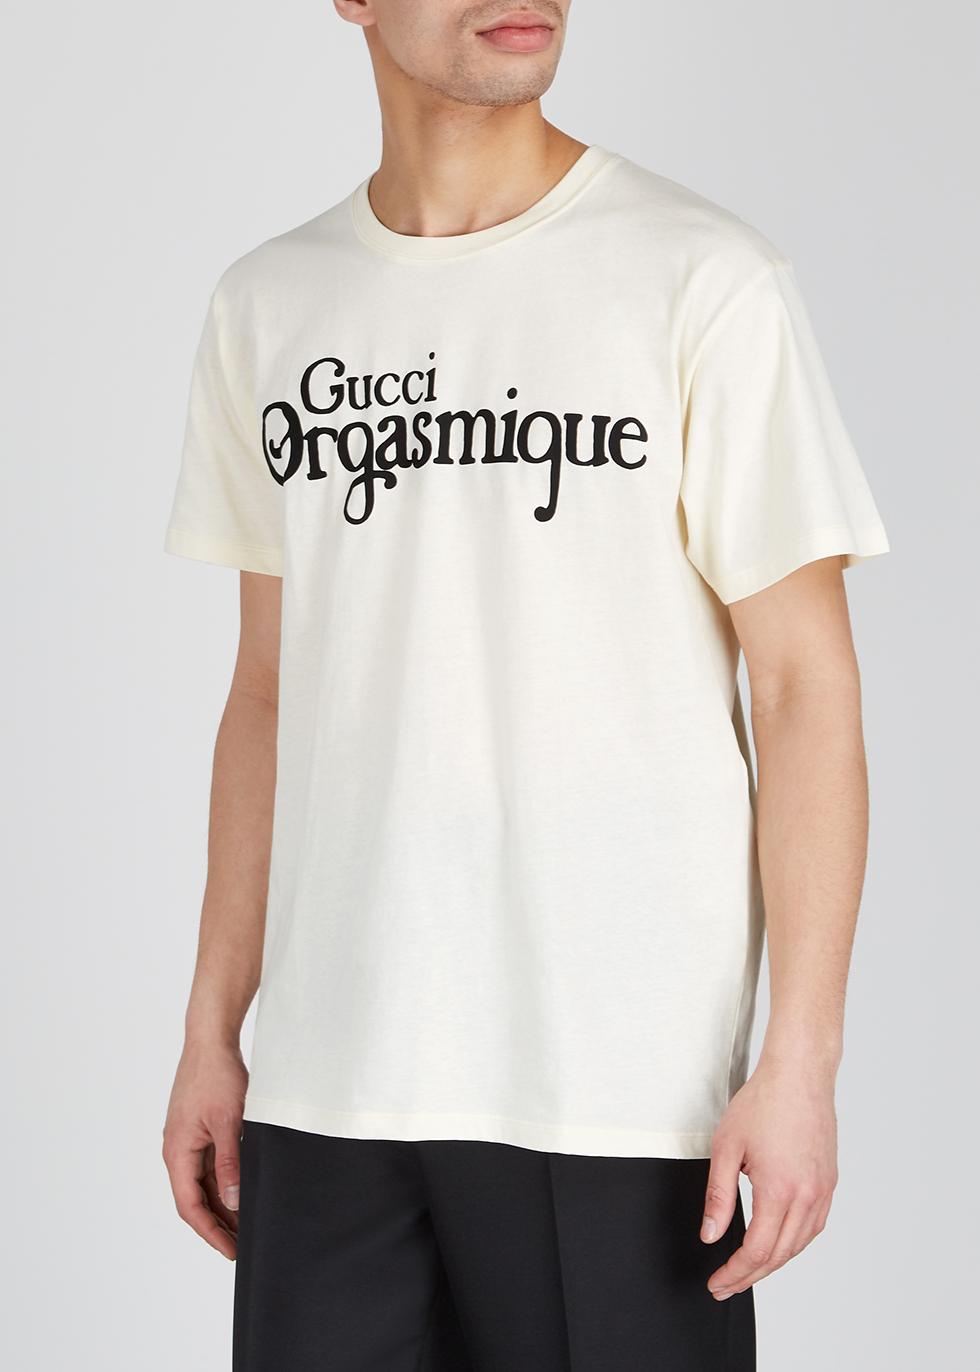 Gucci Orgasmique Print Oversize T-shirt in White for Men | Lyst